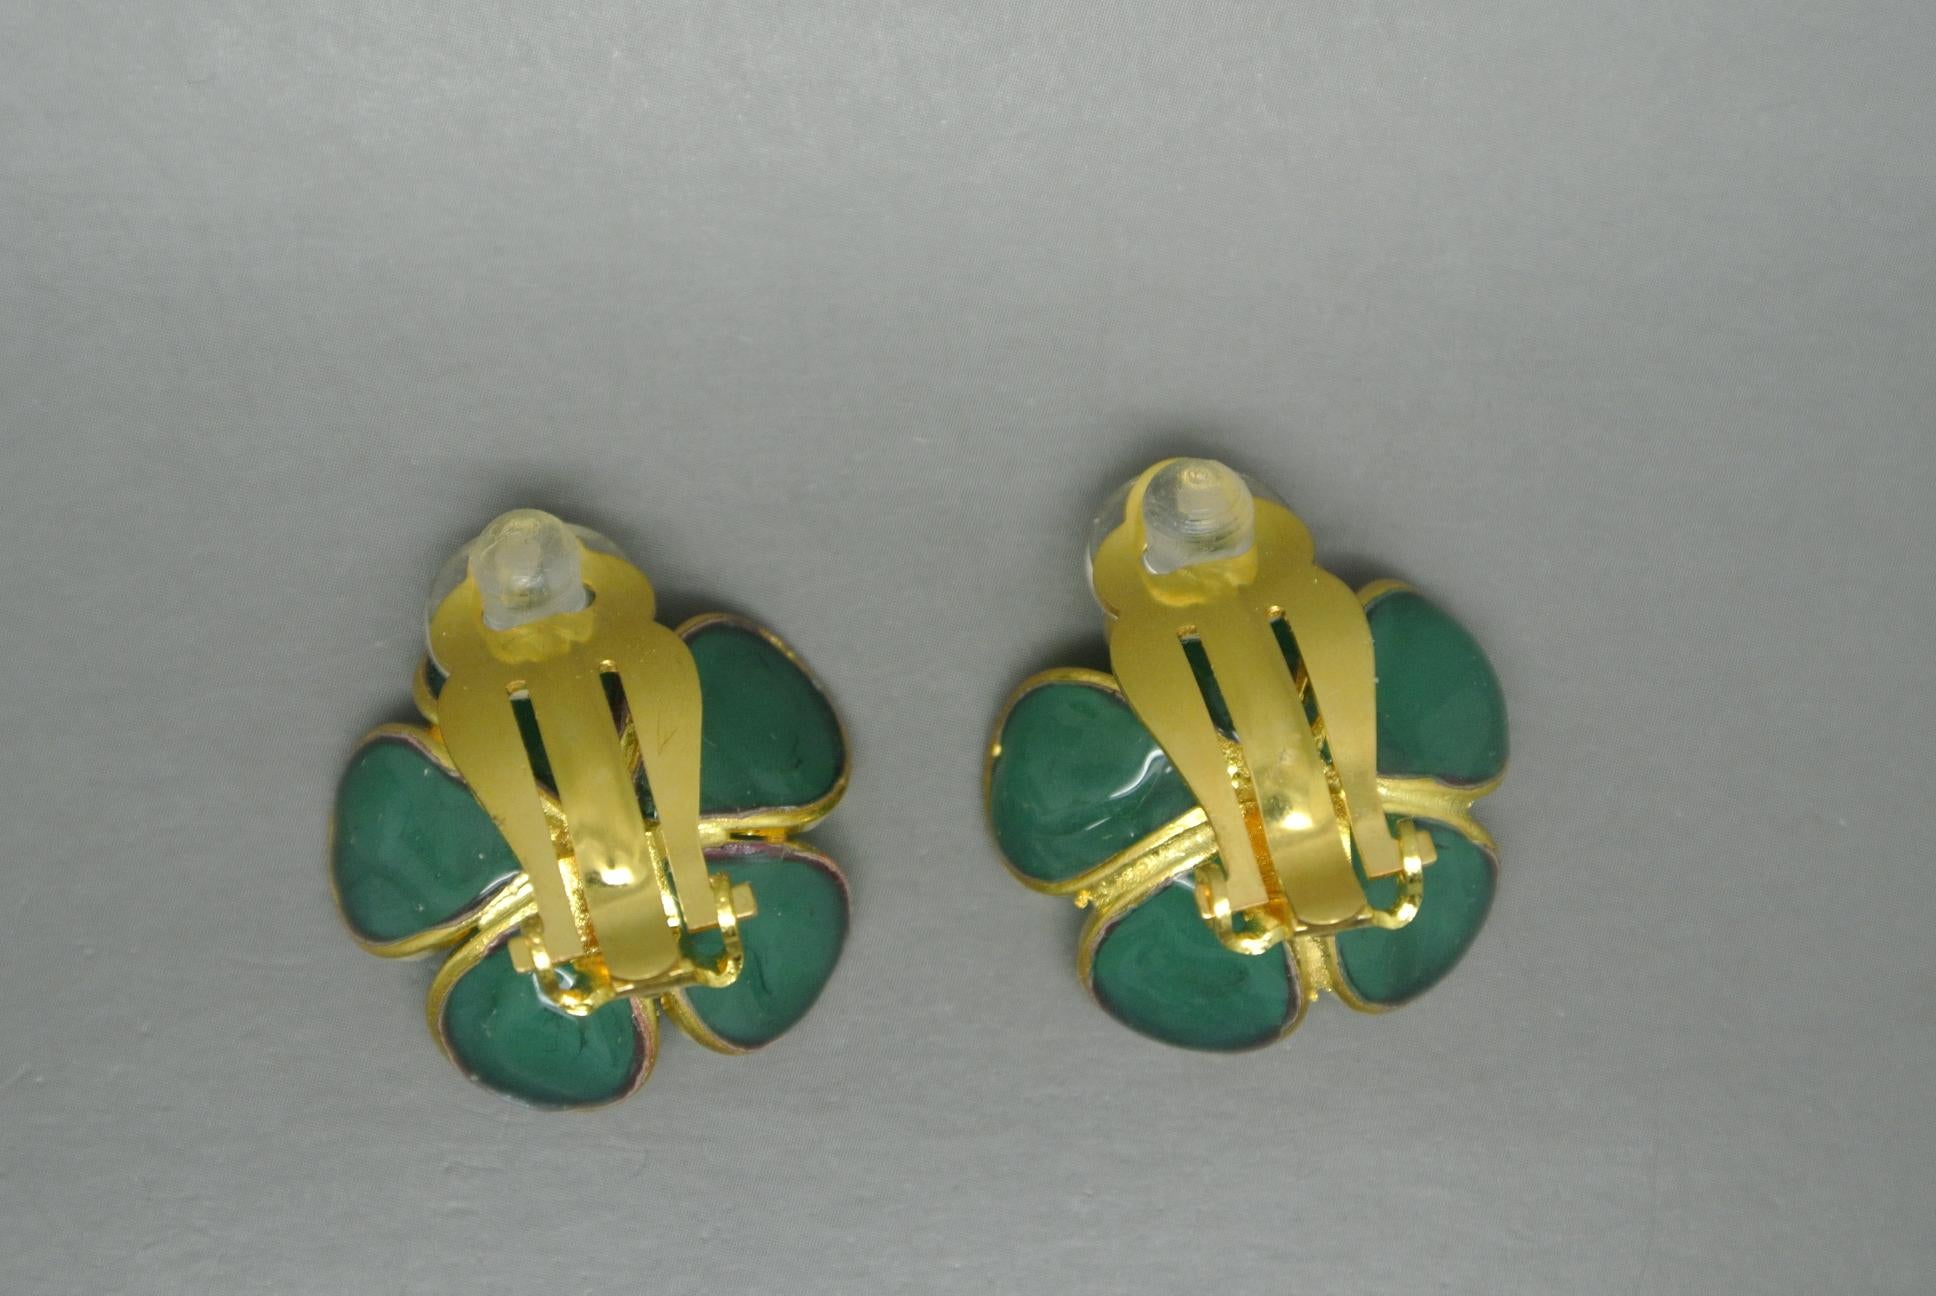 Couture earrings
Made in france originally
by Gripoix
classic flower design
not signed